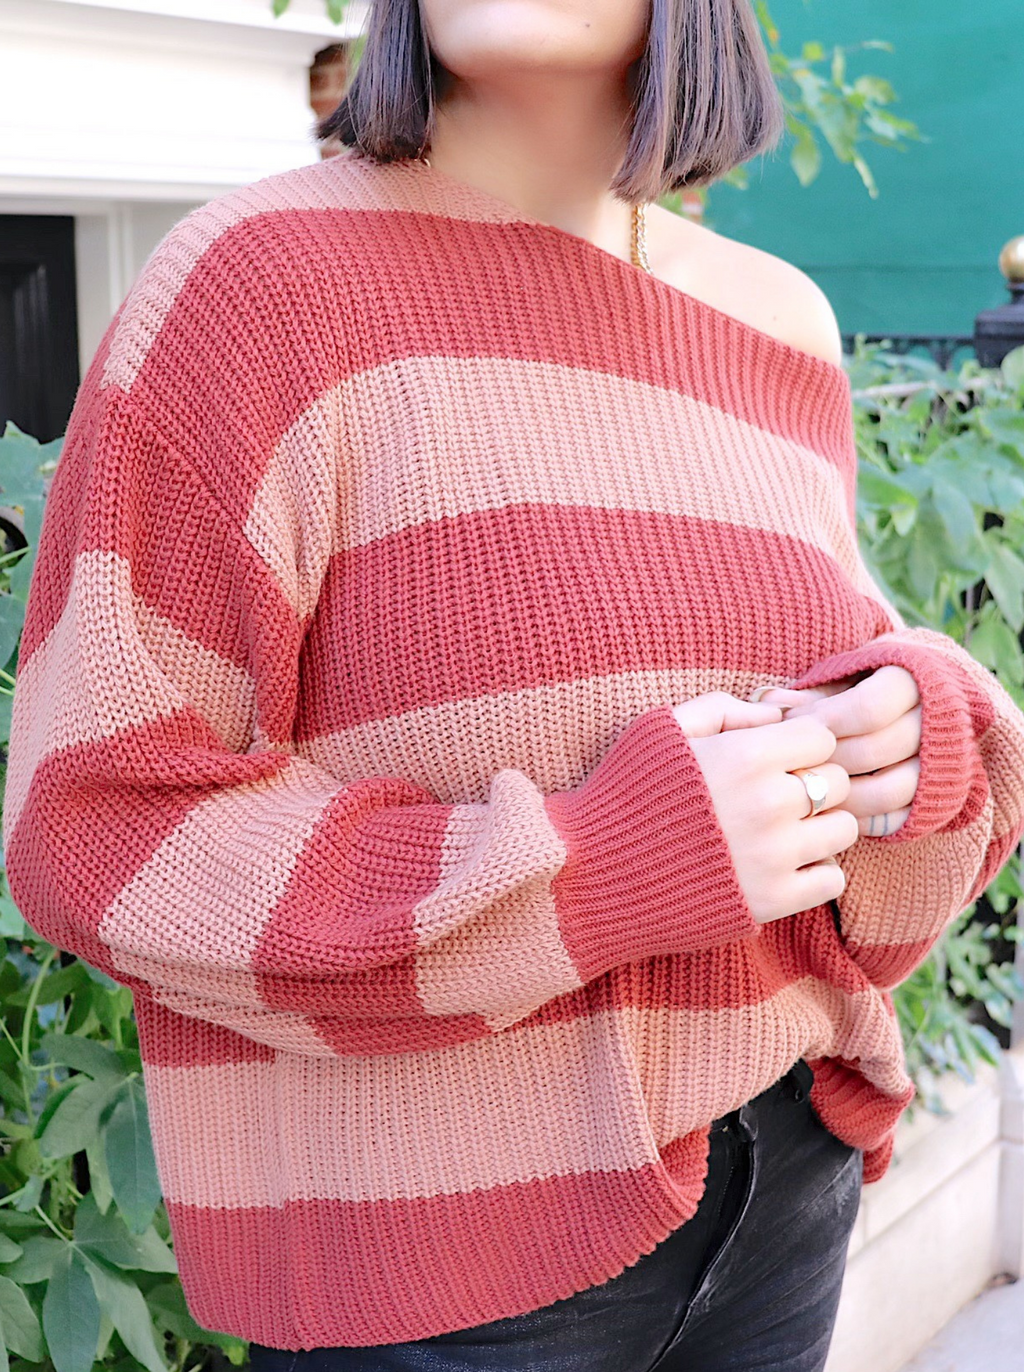 Cinnamon Stripe Relaxed Fit Sweater - marfemme